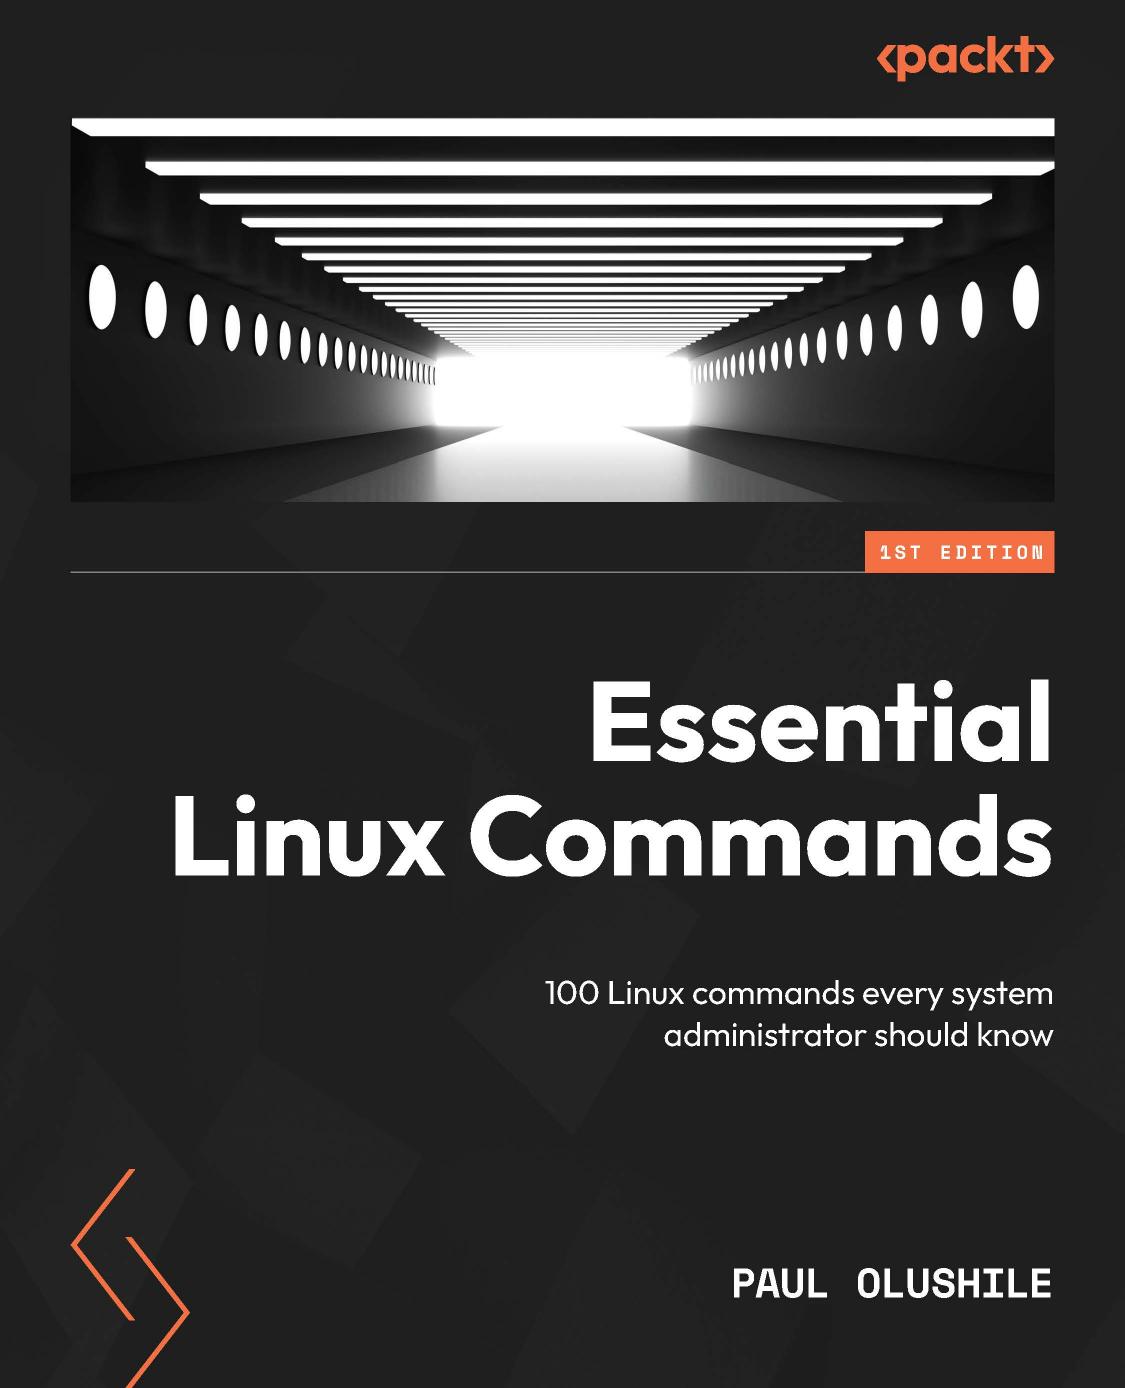 Essential Linux Commands: 100 Linux Commands Every System Administrator Should Know